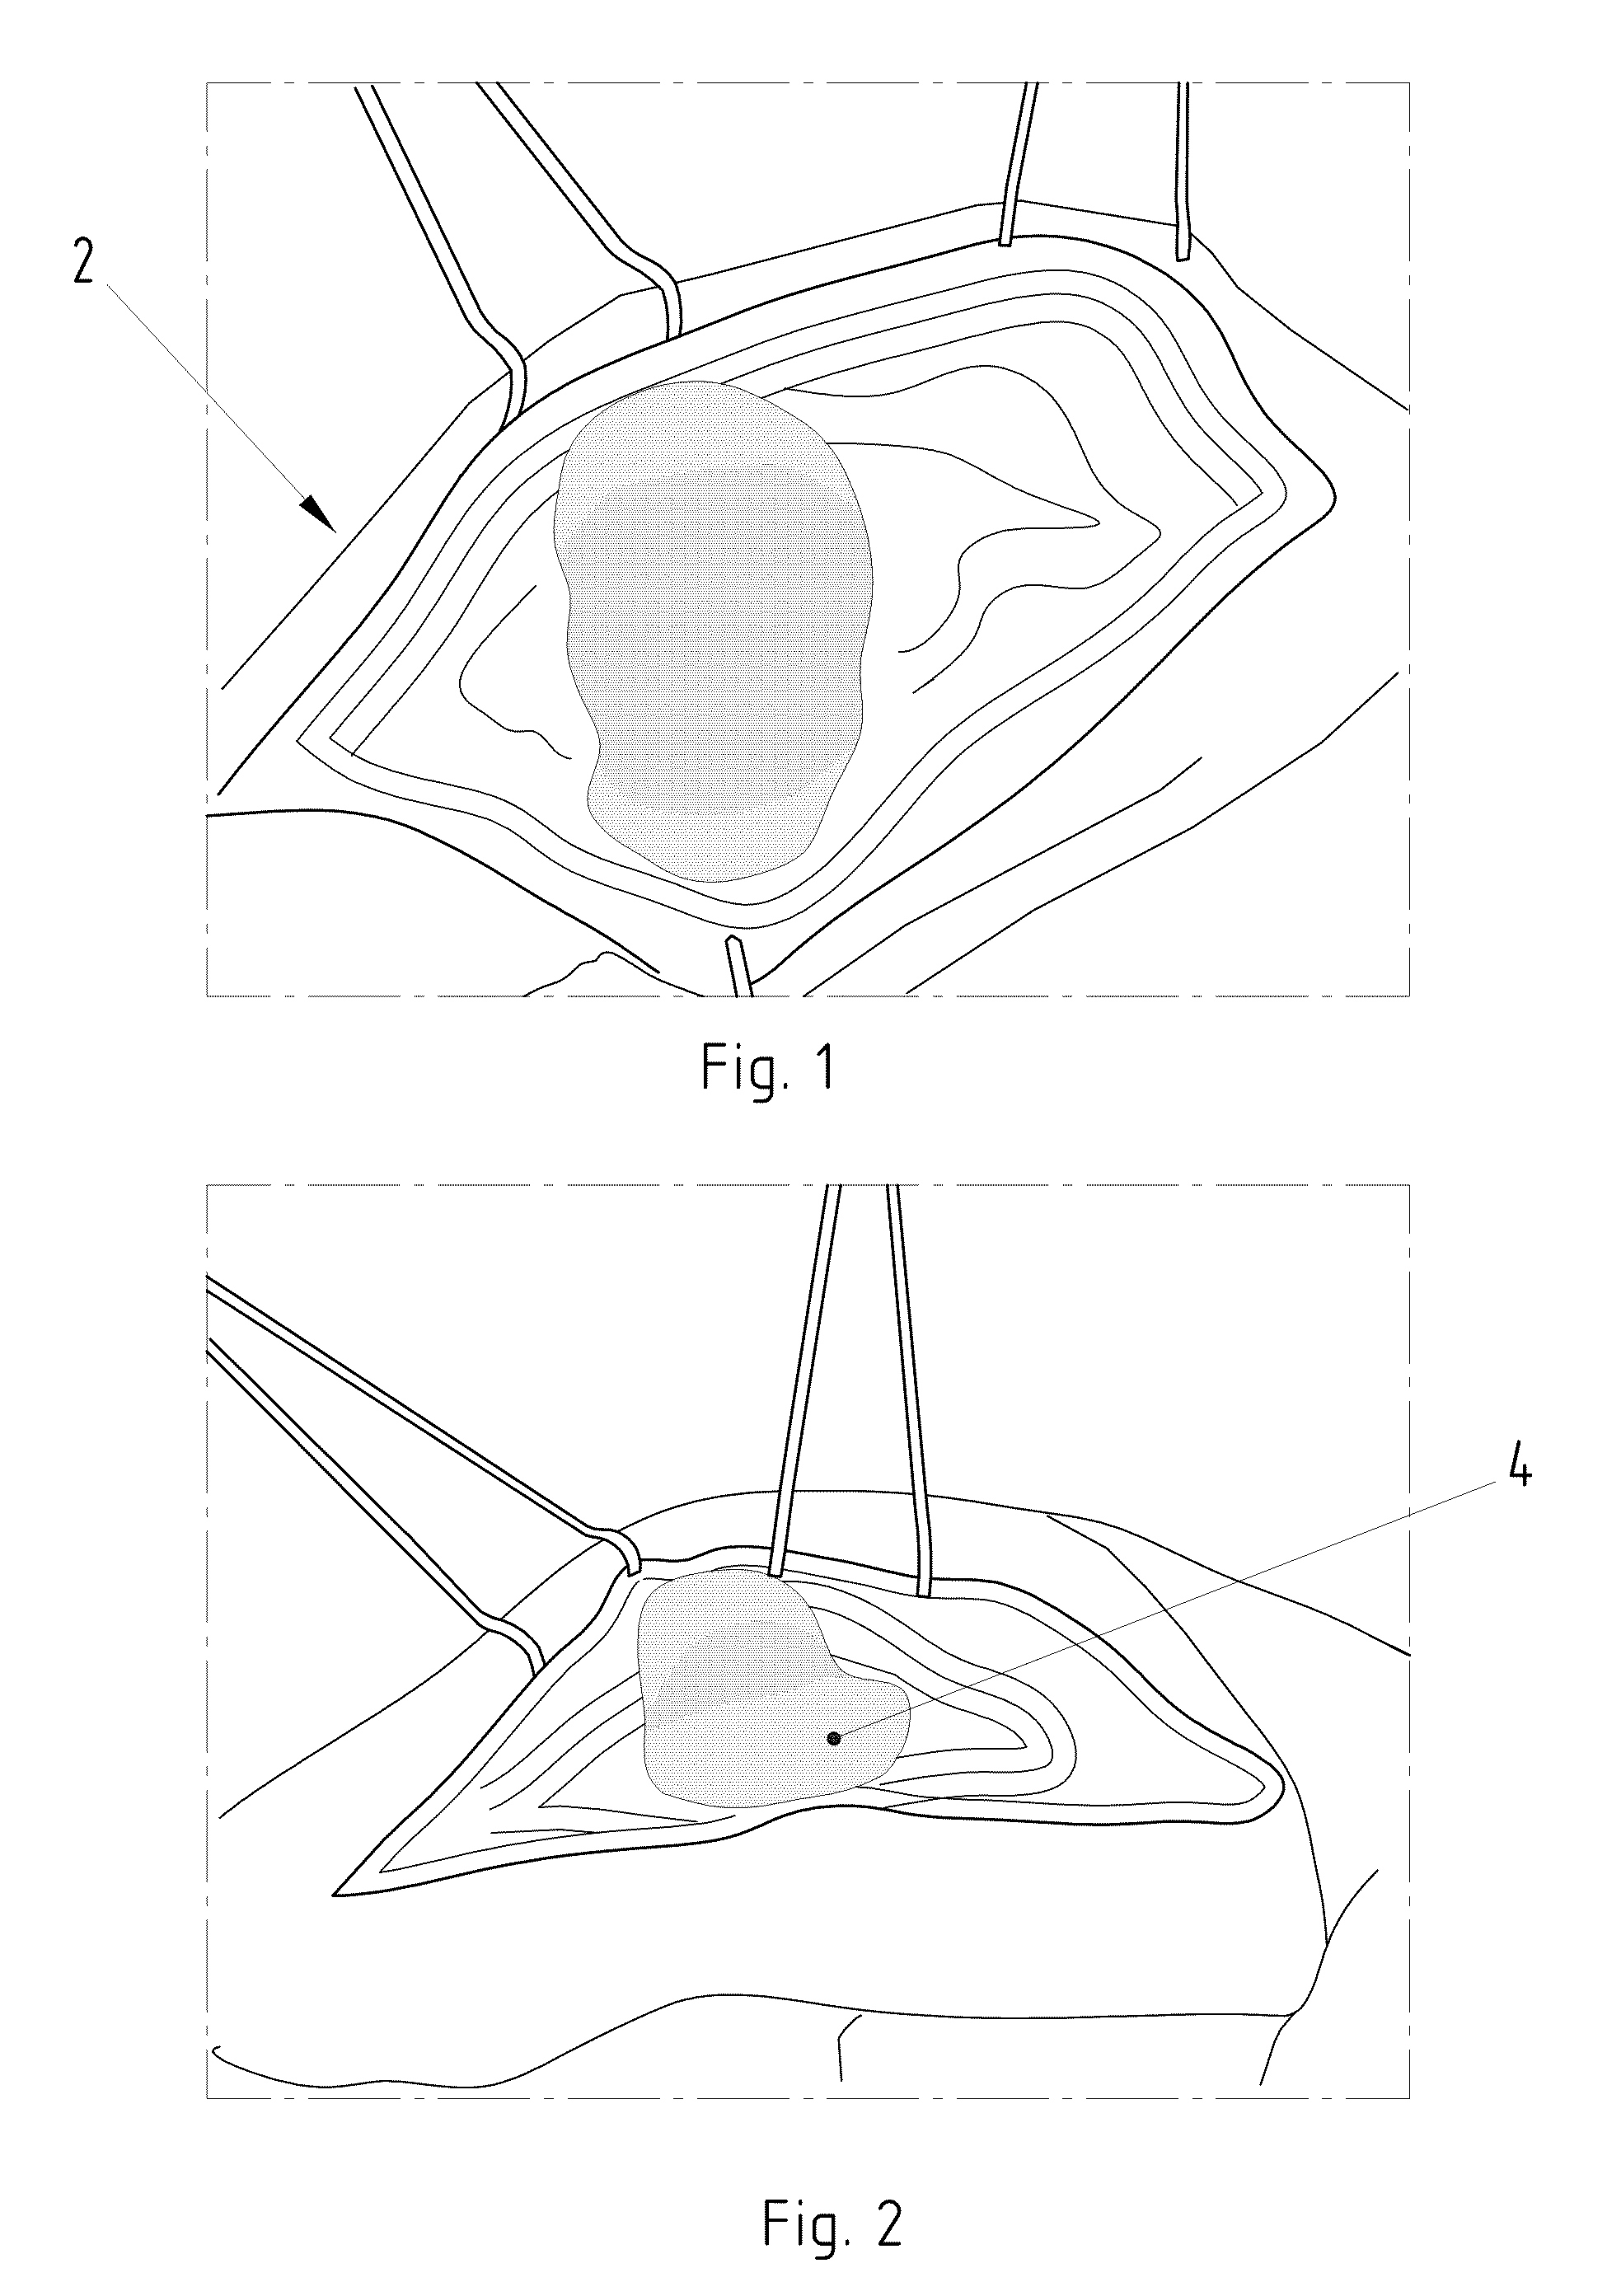 Instruments for carrying out an operating procedure on a joint